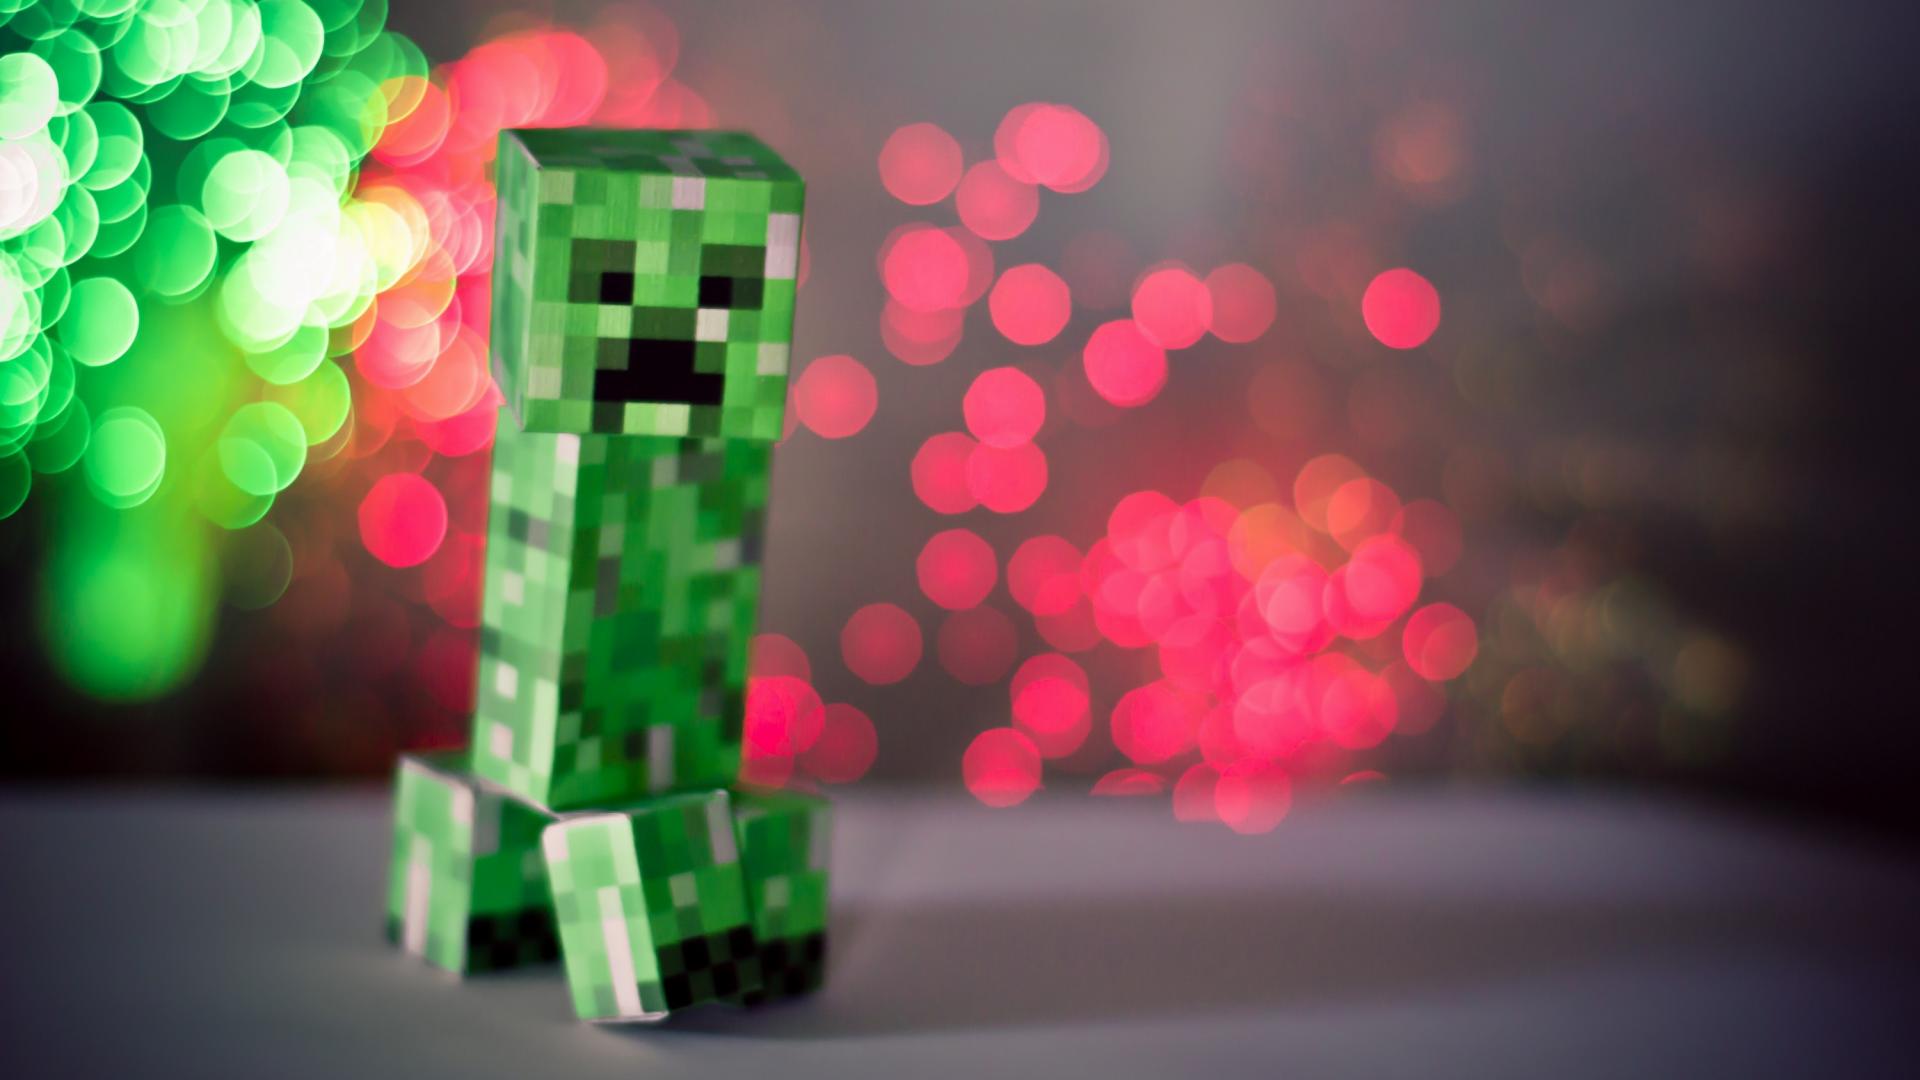 Minecraft Creeper Backgrounds - Wallpaper Cave